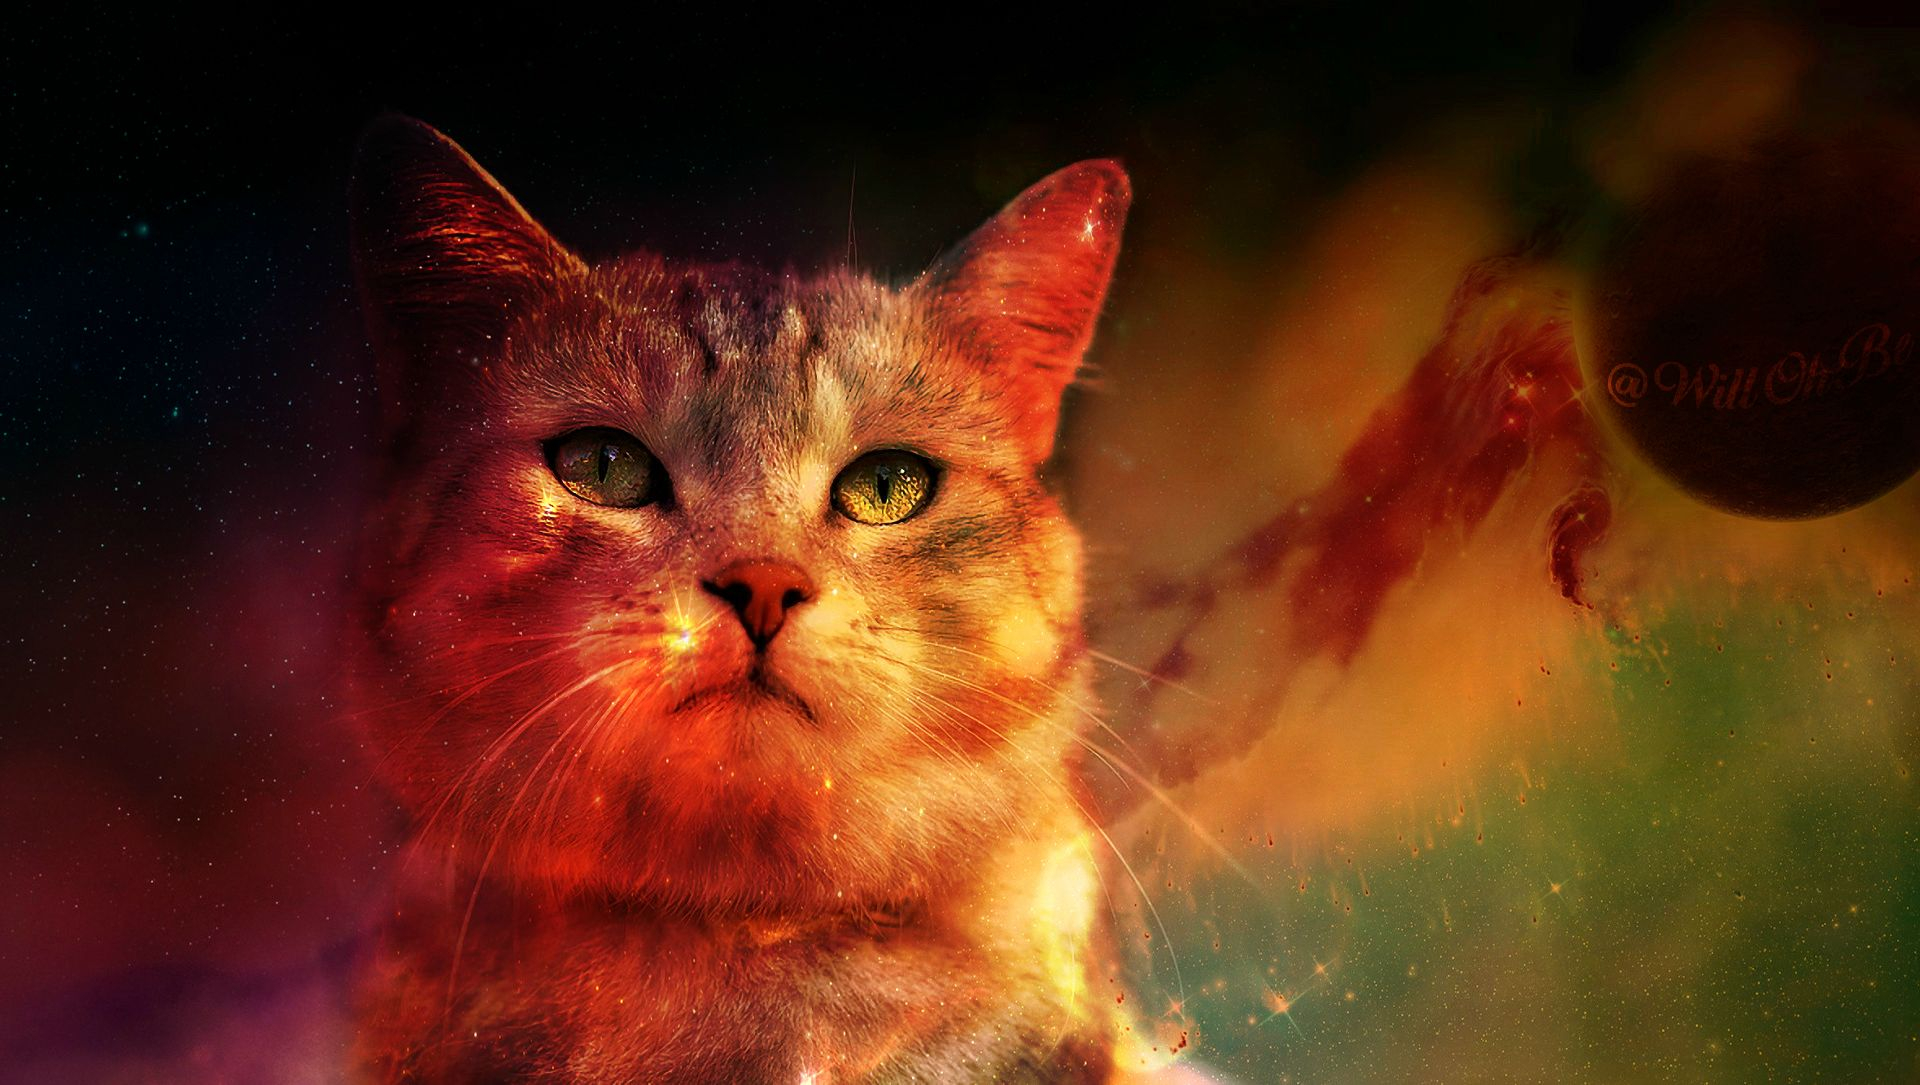 1920x1085 Pin by Ramon Sanchez on Cats in the Space + | Planets wallpaper, Cat wallpaper, Digital art